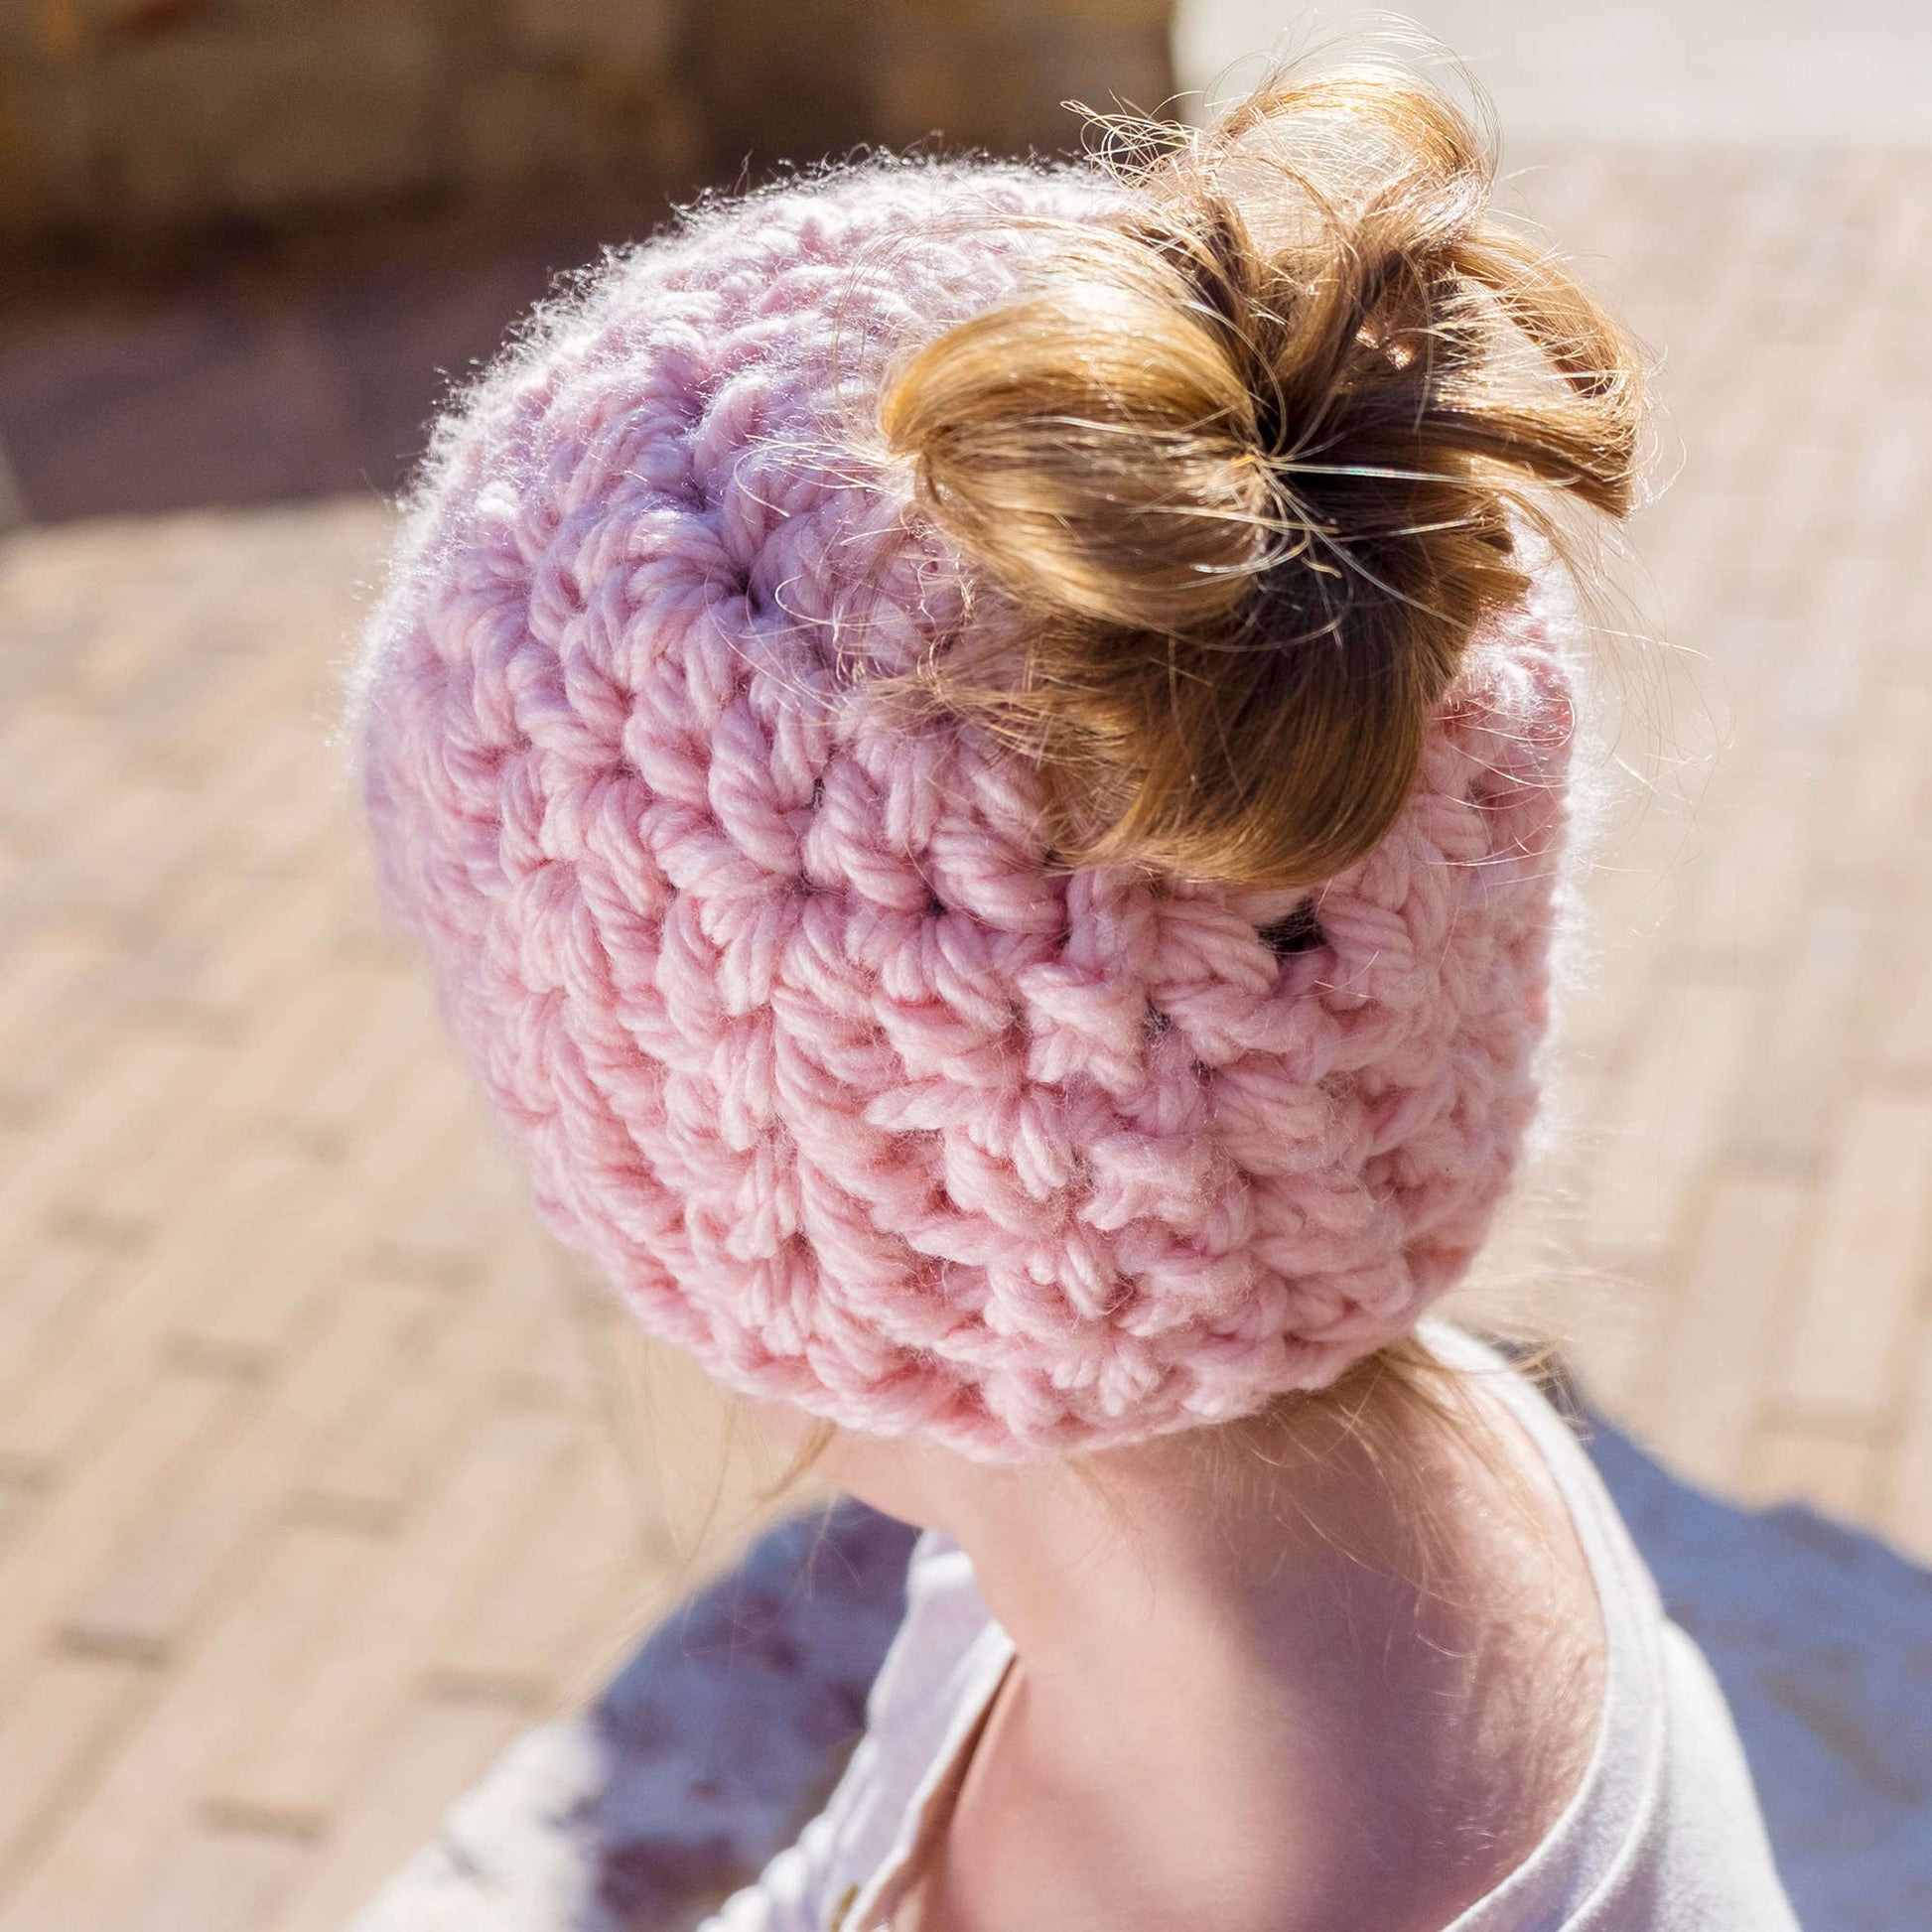 Free Red Heart Childs' Messy Bun Hat Pattern